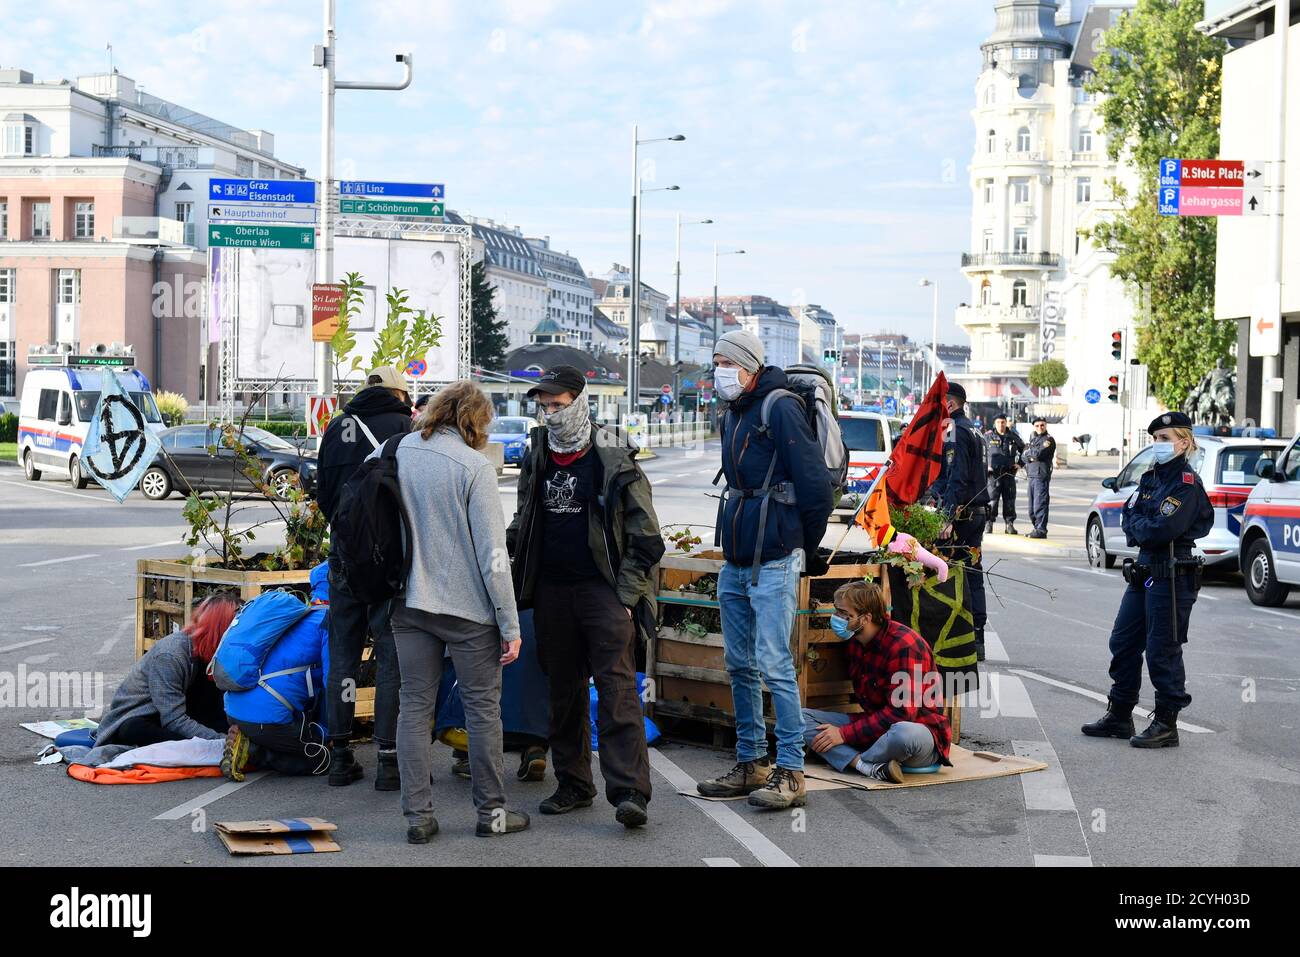 Vienna, Austria. 2nd Oct, 2020. After several disruptions in the city, the activists of the "Extinction Rebellion" blocked another street: Operngasse in the center of Vienna has been closed since last night. Credit: Franz Perc/Alamy Live News Stock Photo